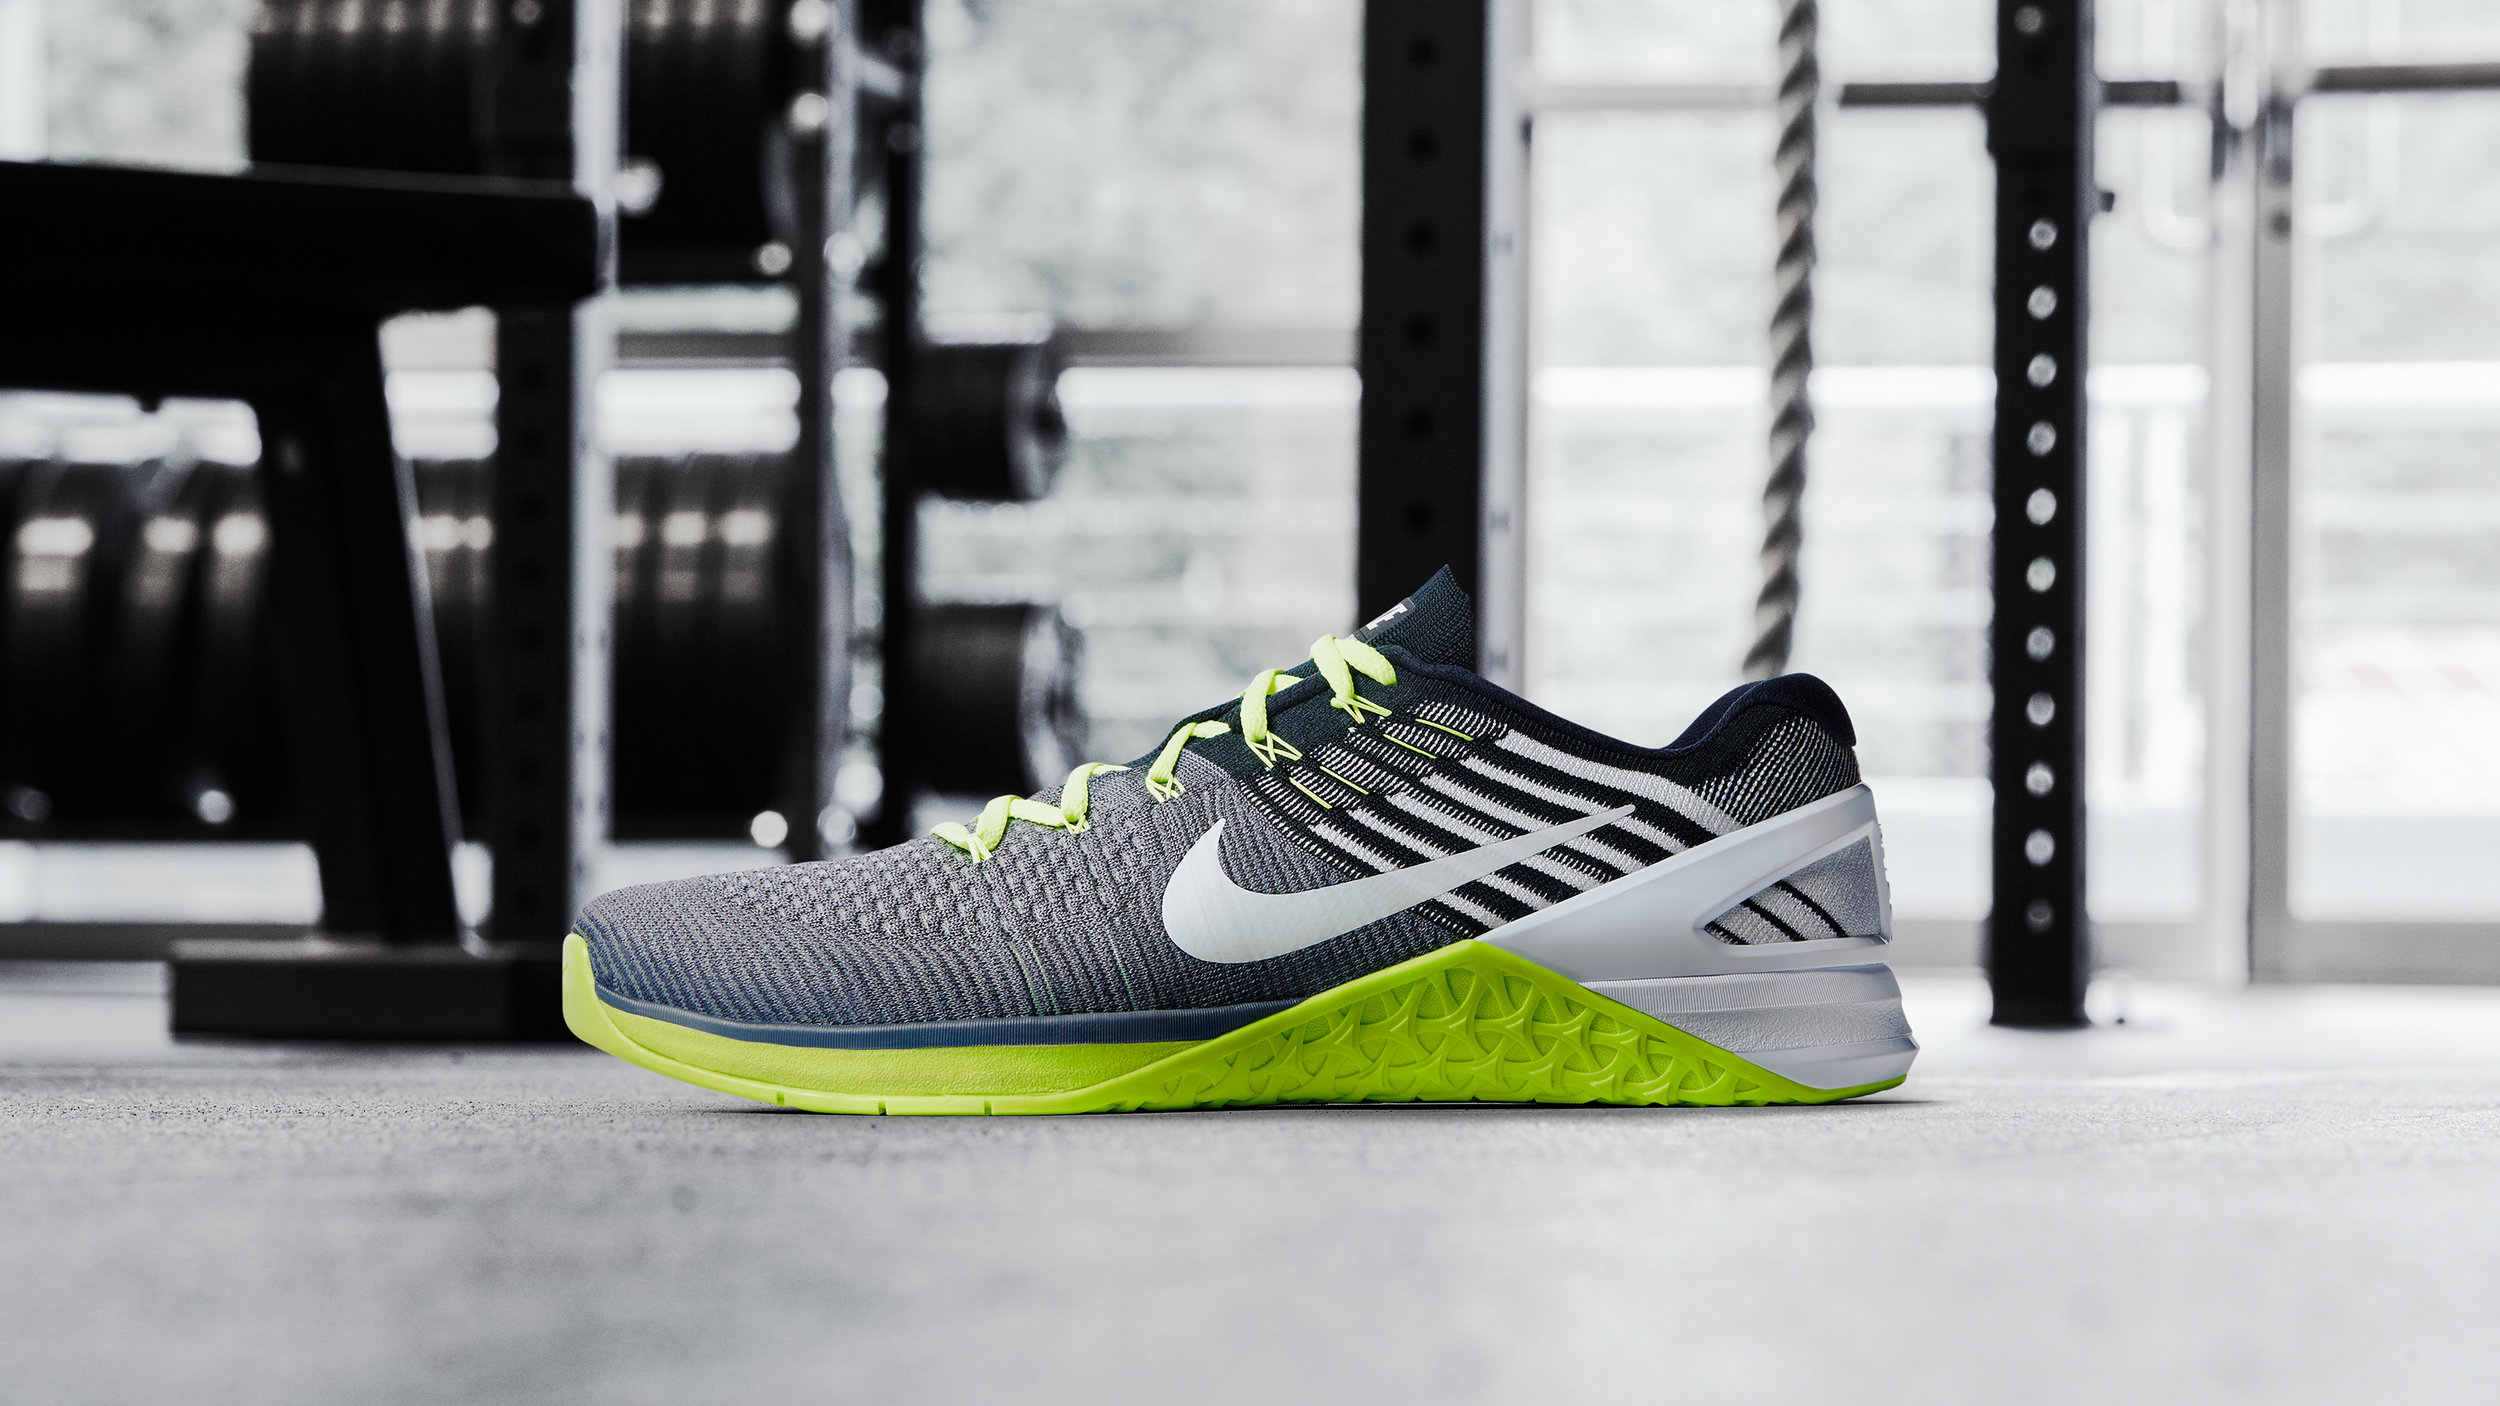 Introducing the Nike Metcon DSX Flyknit The Metcon 3 Nike Training — FITFLYFELLOW